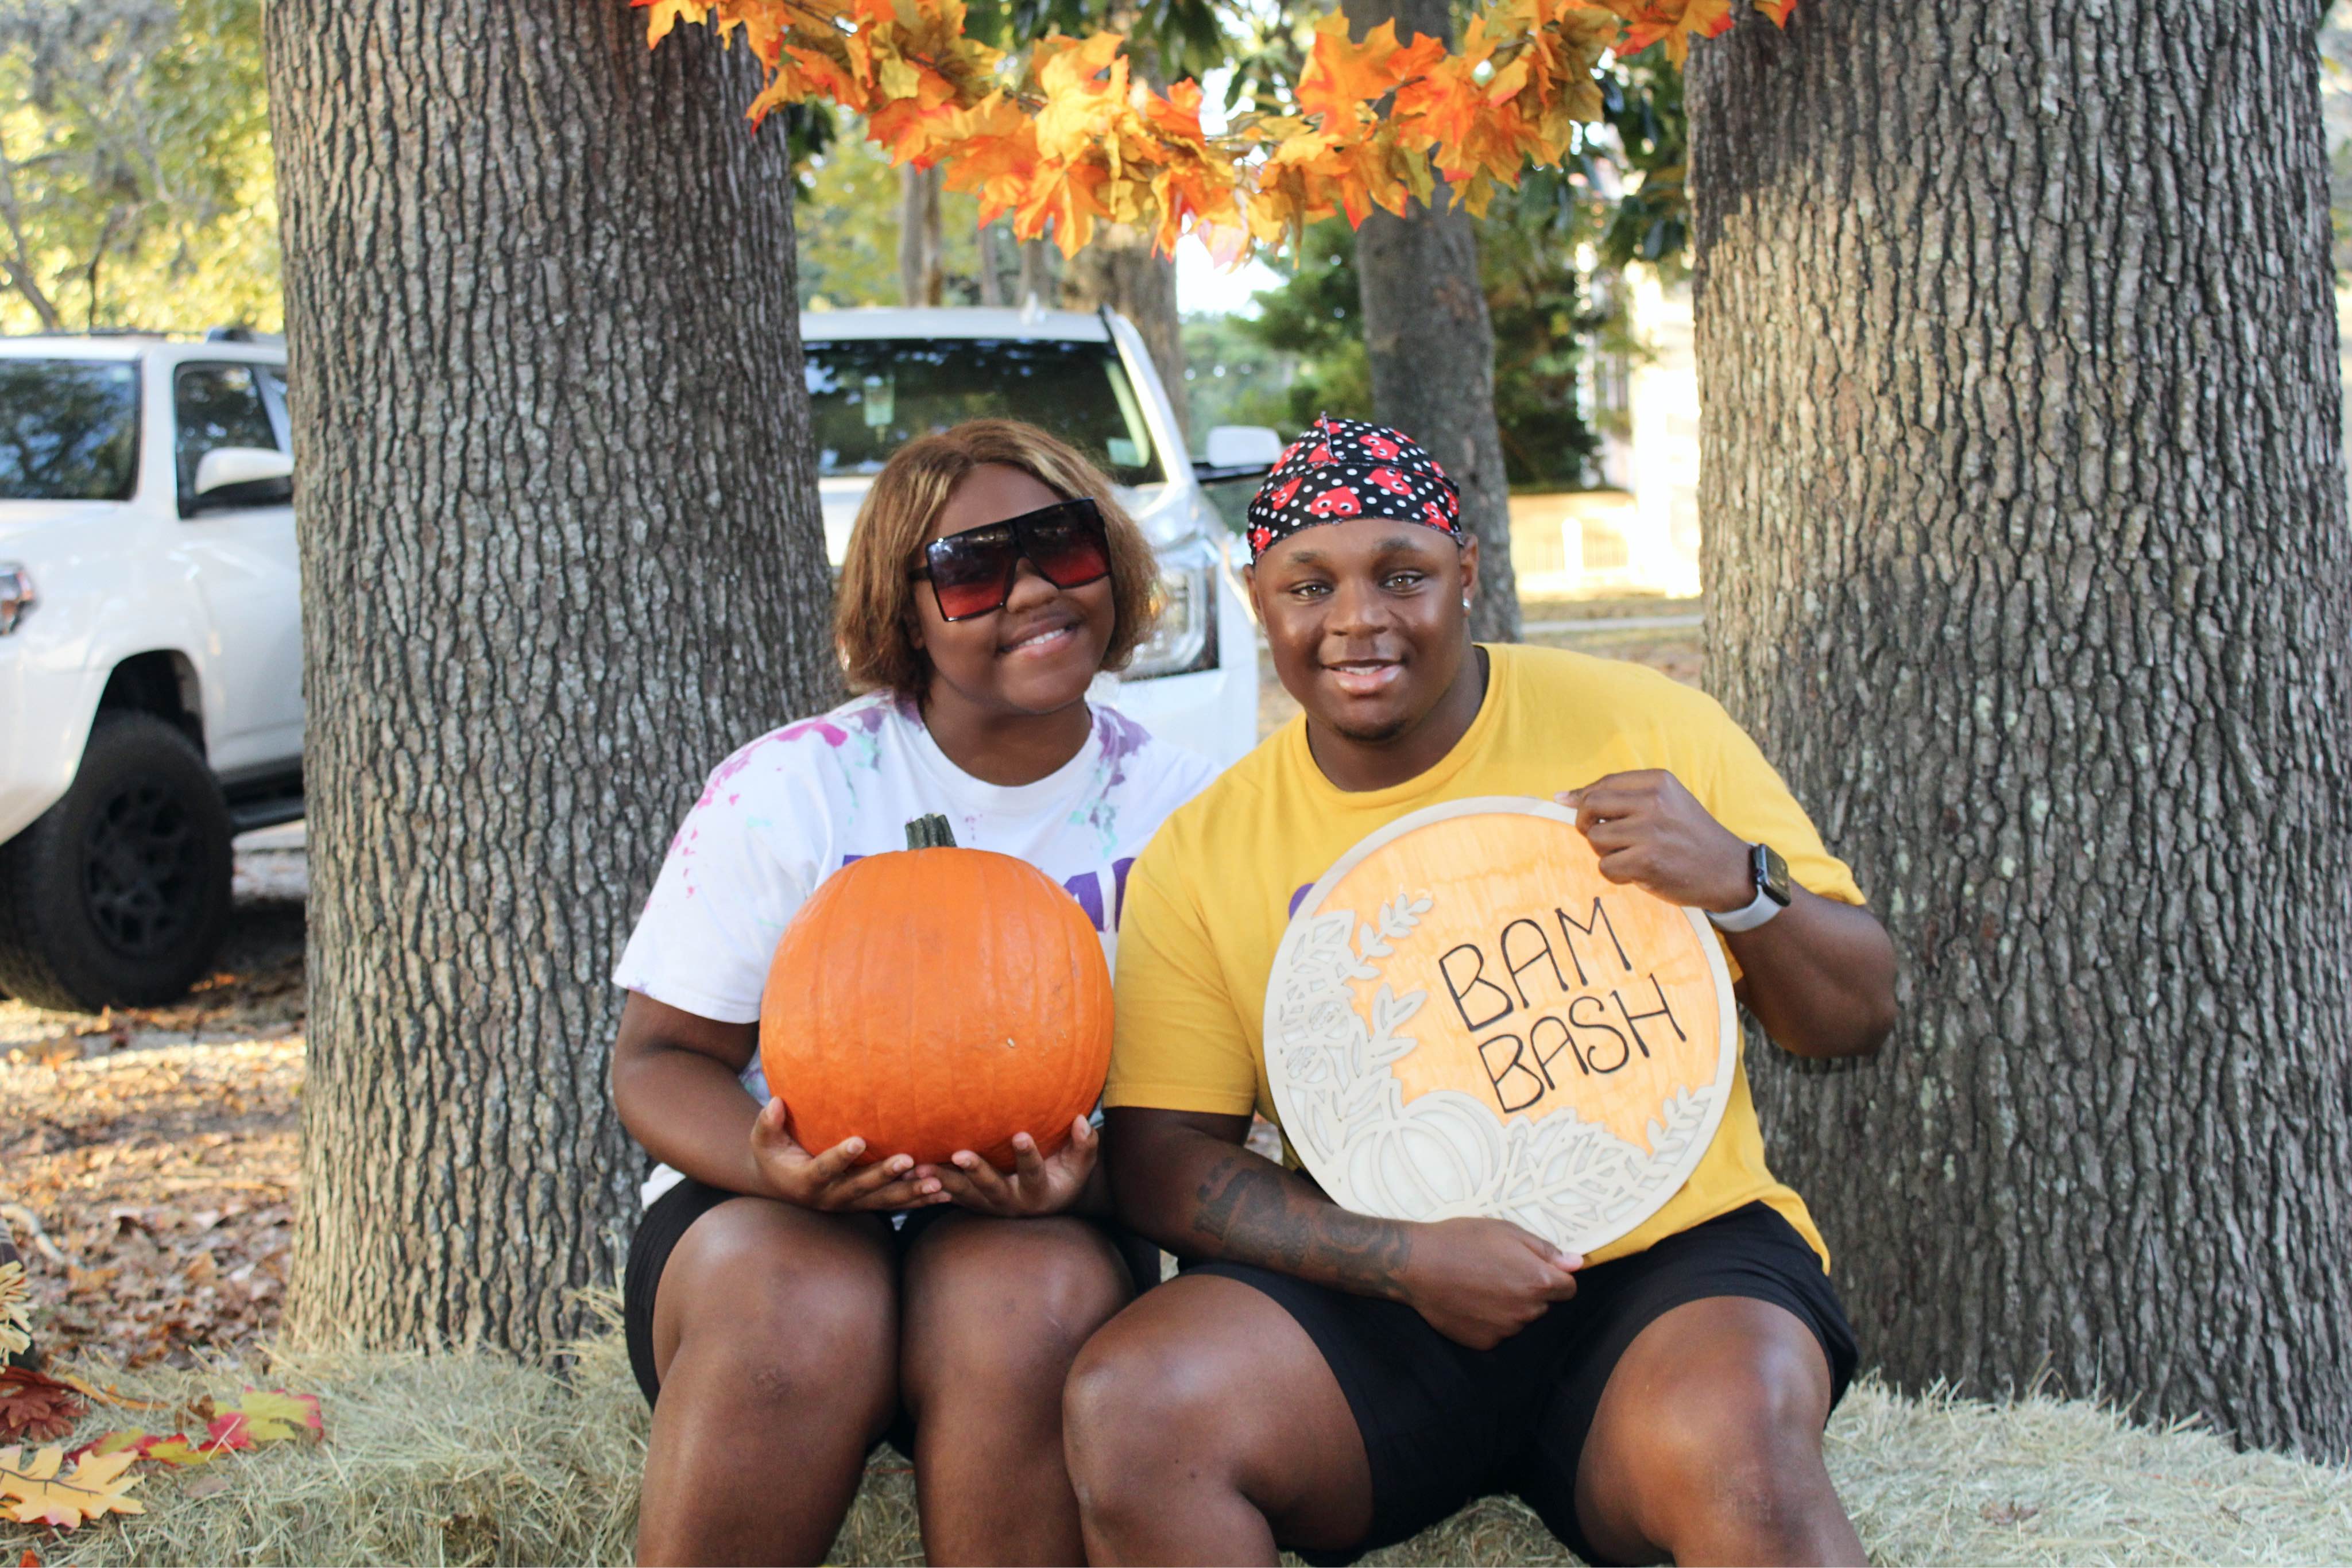 Students posing for a picture while holding a pumpkin and a sign that says BAM Bash.